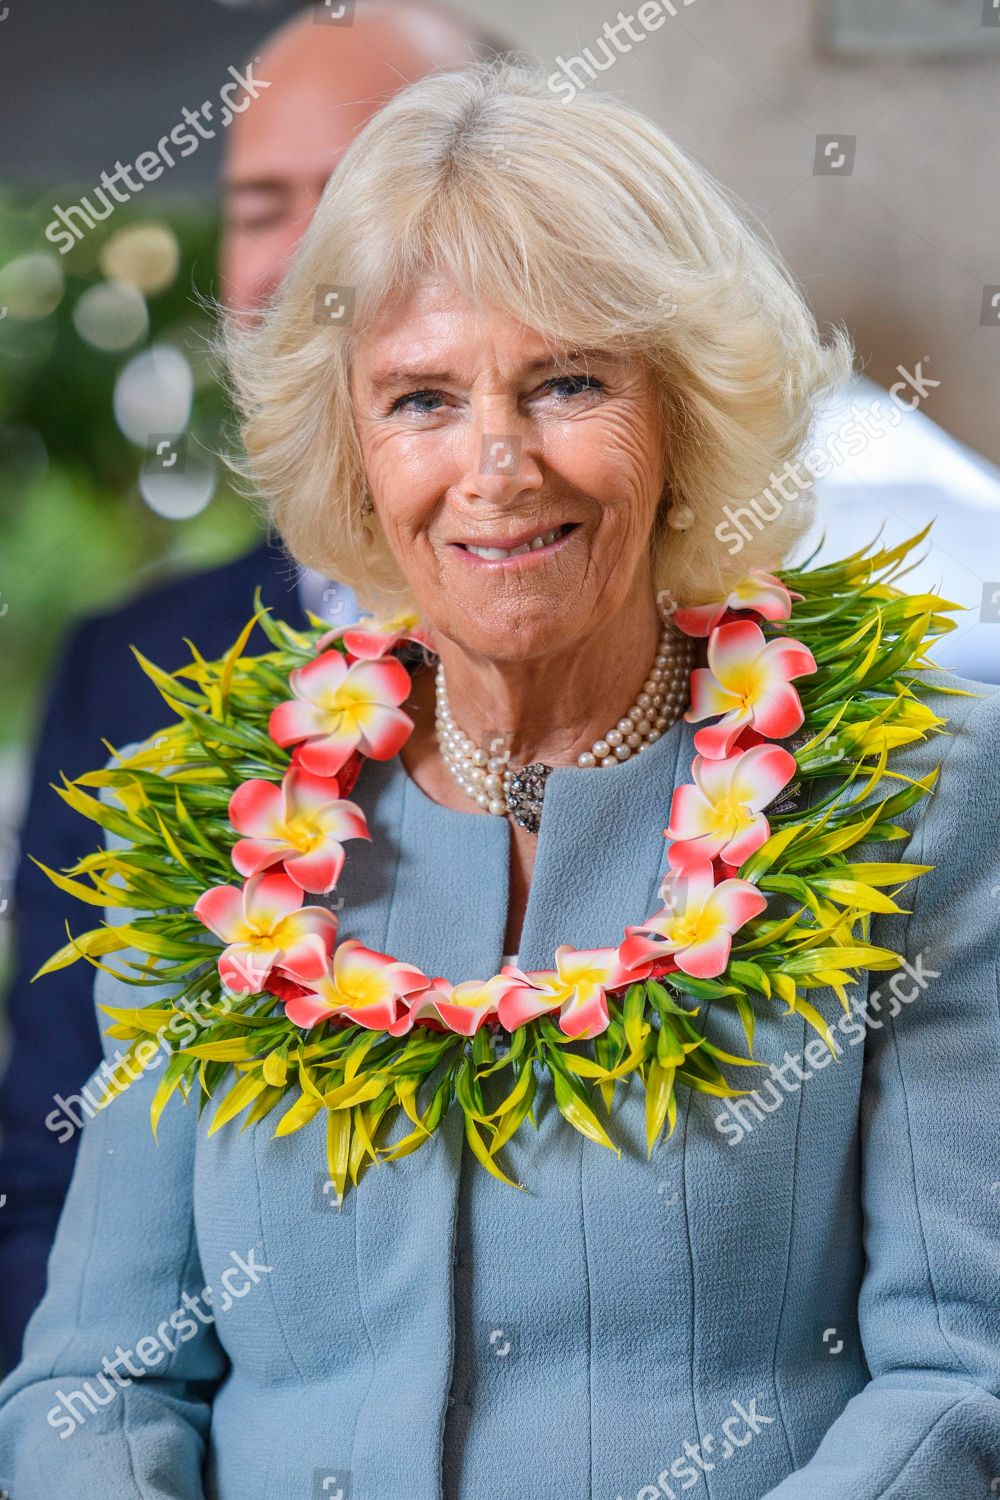 prince-charles-and-camilla-duchess-of-cornwall-visit-to-new-zealand-shutterstock-editorial-10477774gr.jpg